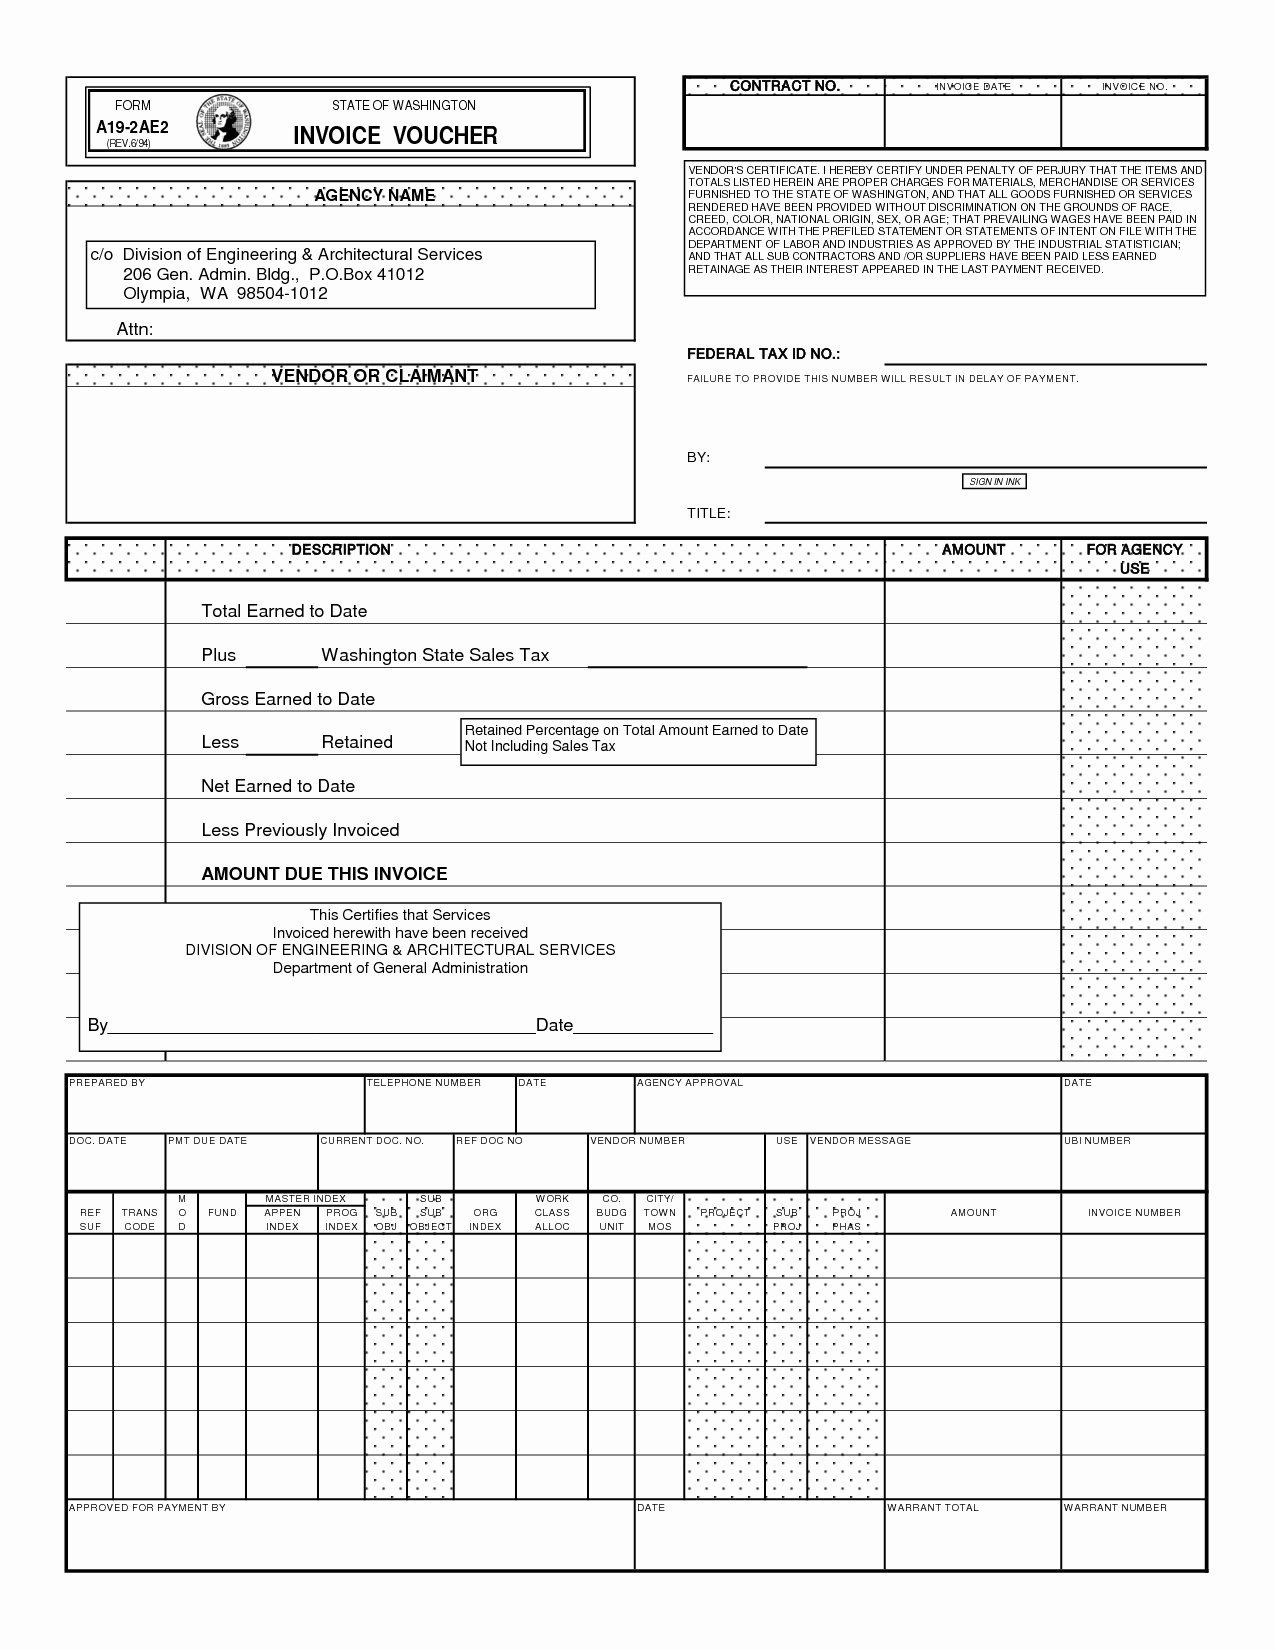 Independent Contractor Invoice Template Excel Elegant Independent Contractor Invoice Template Free – Db